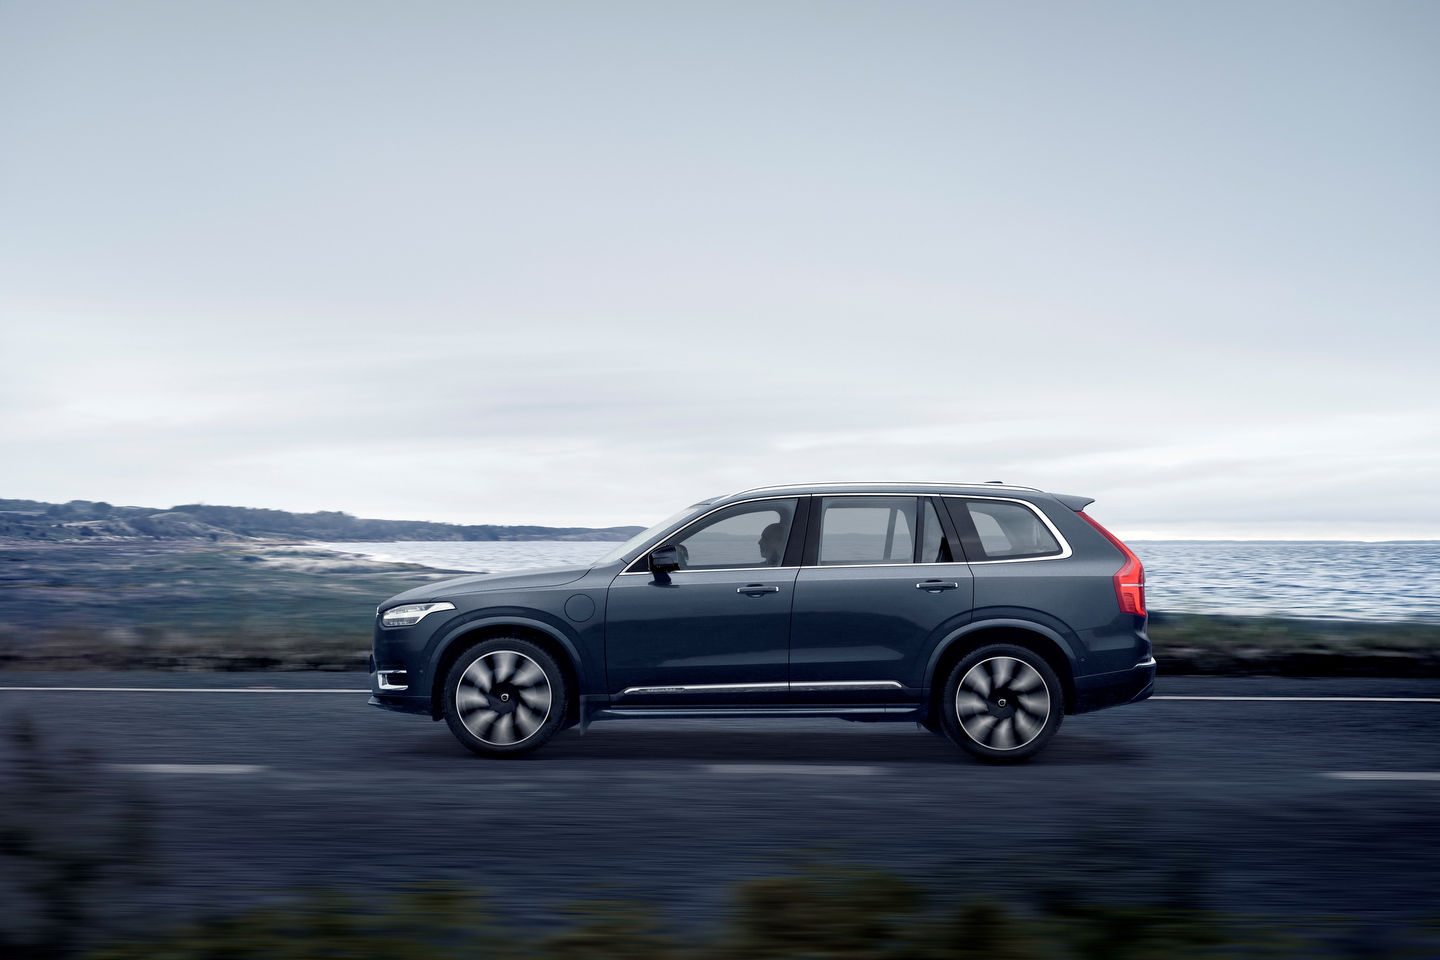 Key improvements made to the 2023 Volvo SUV lineup